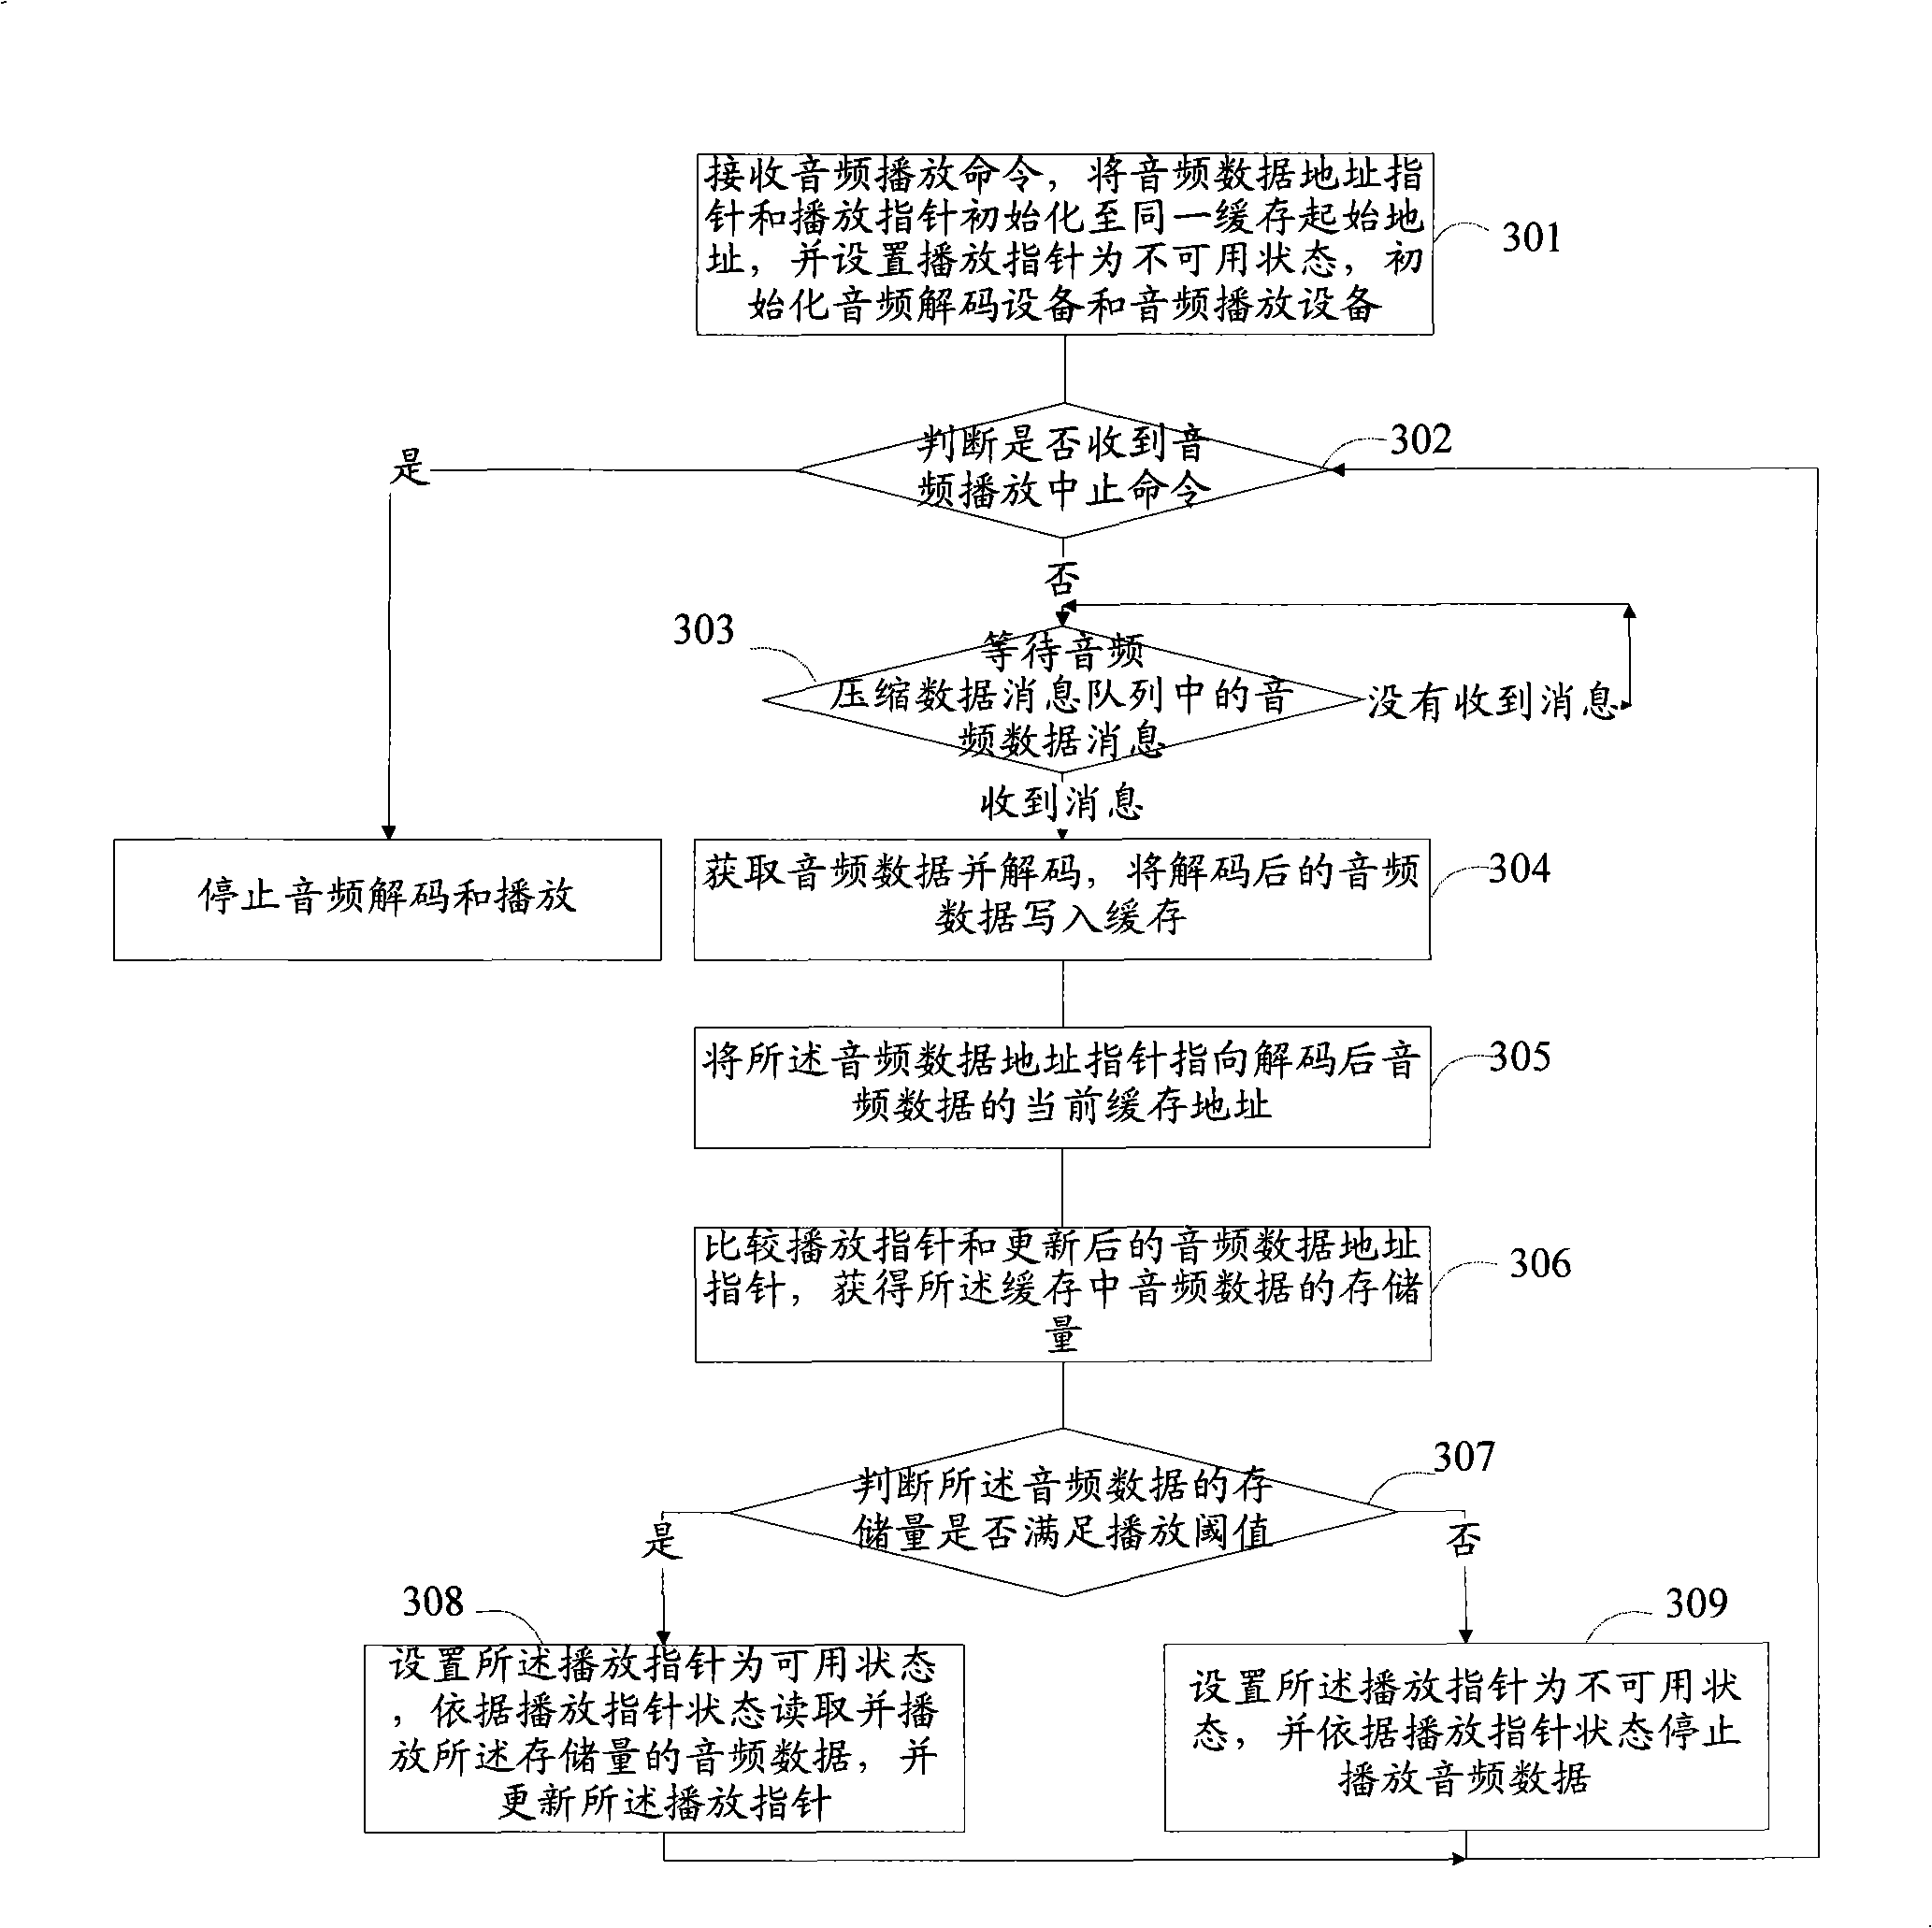 Audio playing apparatus and method, and digital television chip